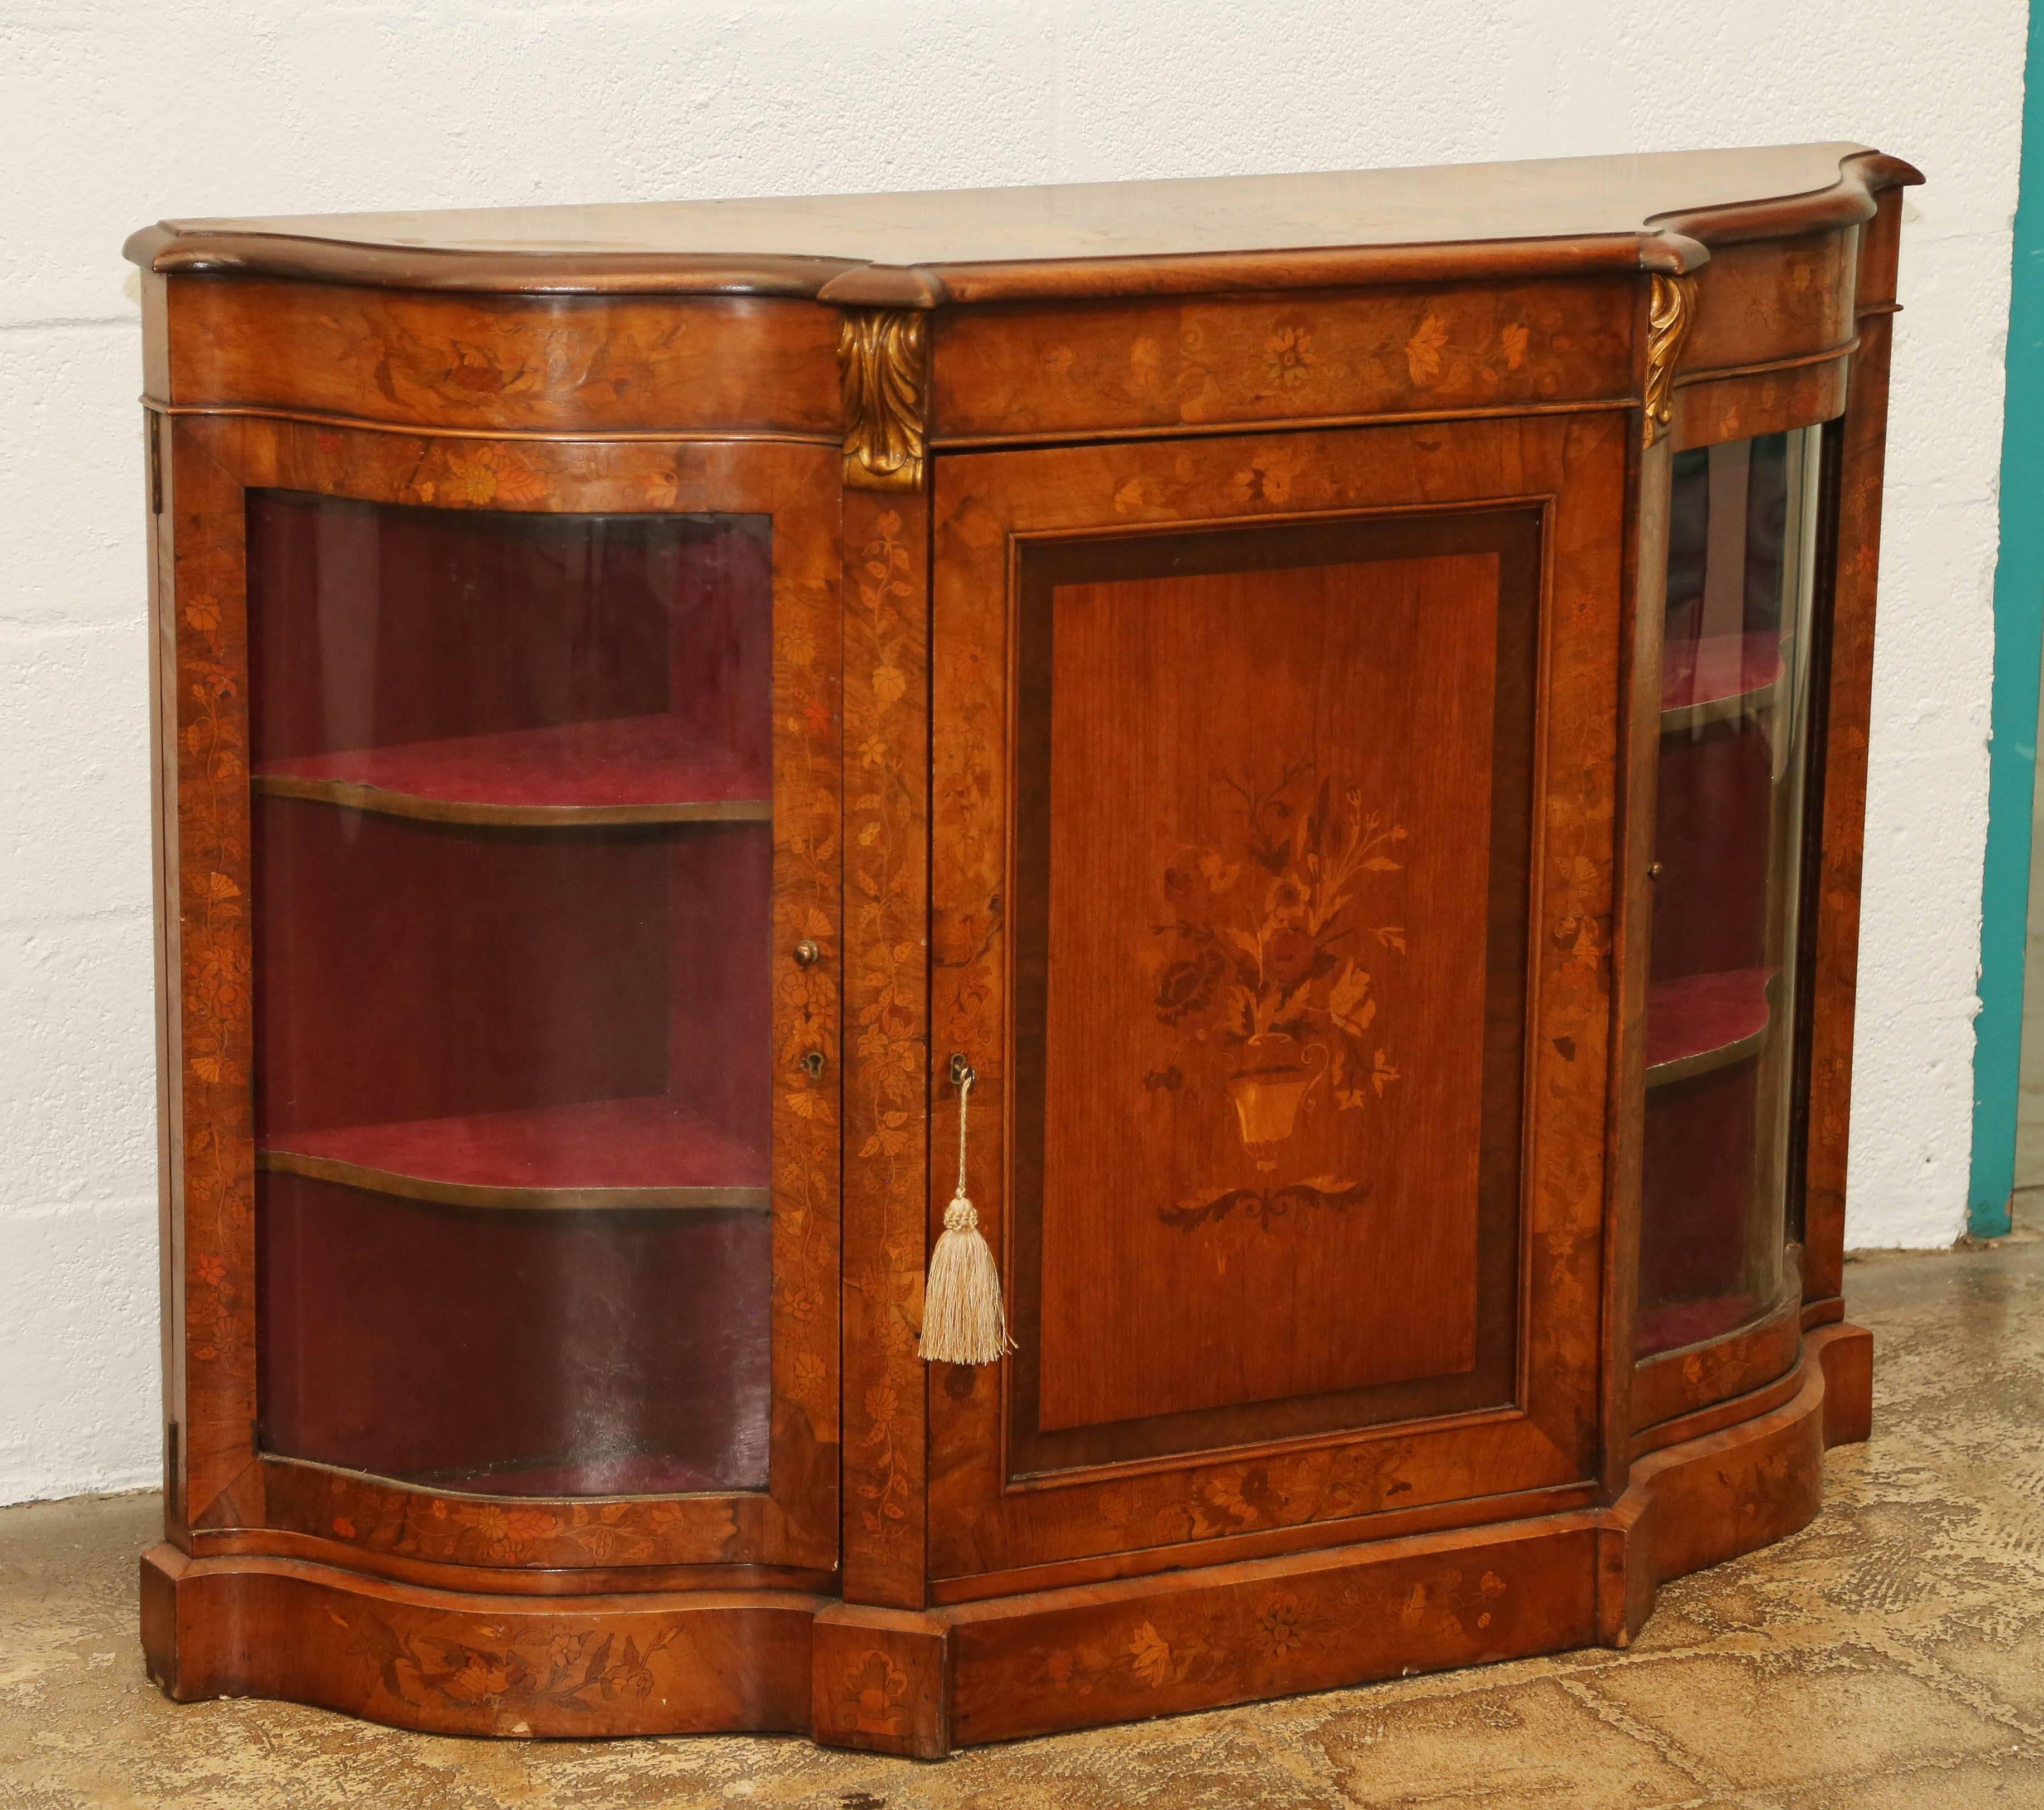 Fine marquetry inlay and graceful proportions mark this superior pair of cabinets.
Narrow width makes for easy placement.
Simply the finest quality and workmanship.